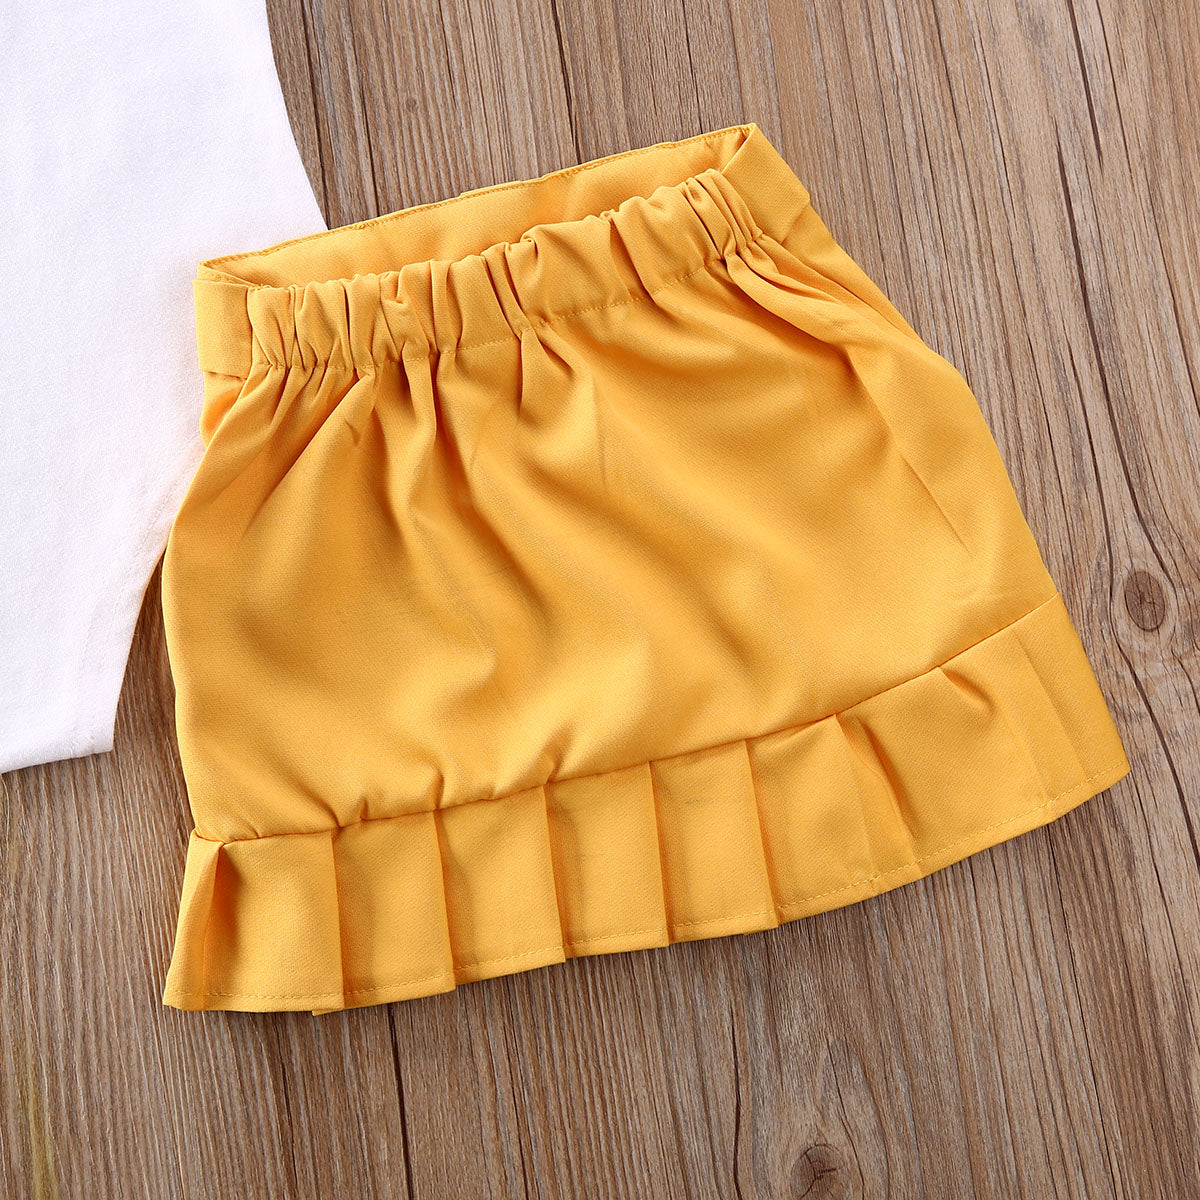 2 Piece Toddler Kids Baby Girl Clothes Sleeveless Solid Vest Romper Yellow Pleated Skirt Summer Outfit Set The Clothing Company Sydney